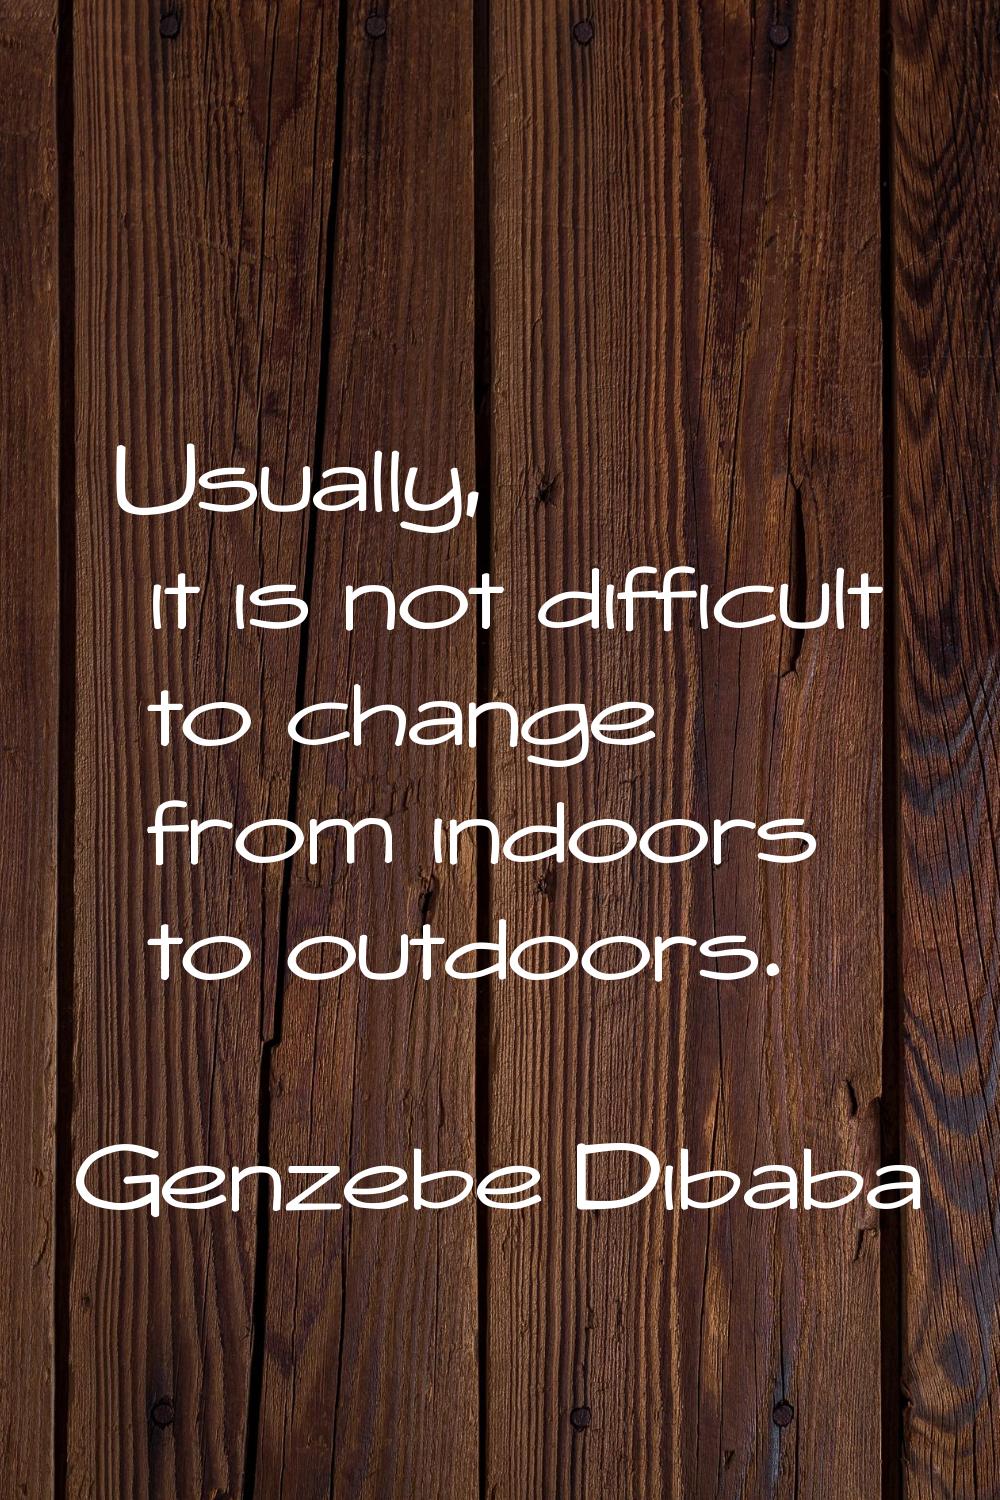 Usually, it is not difficult to change from indoors to outdoors.